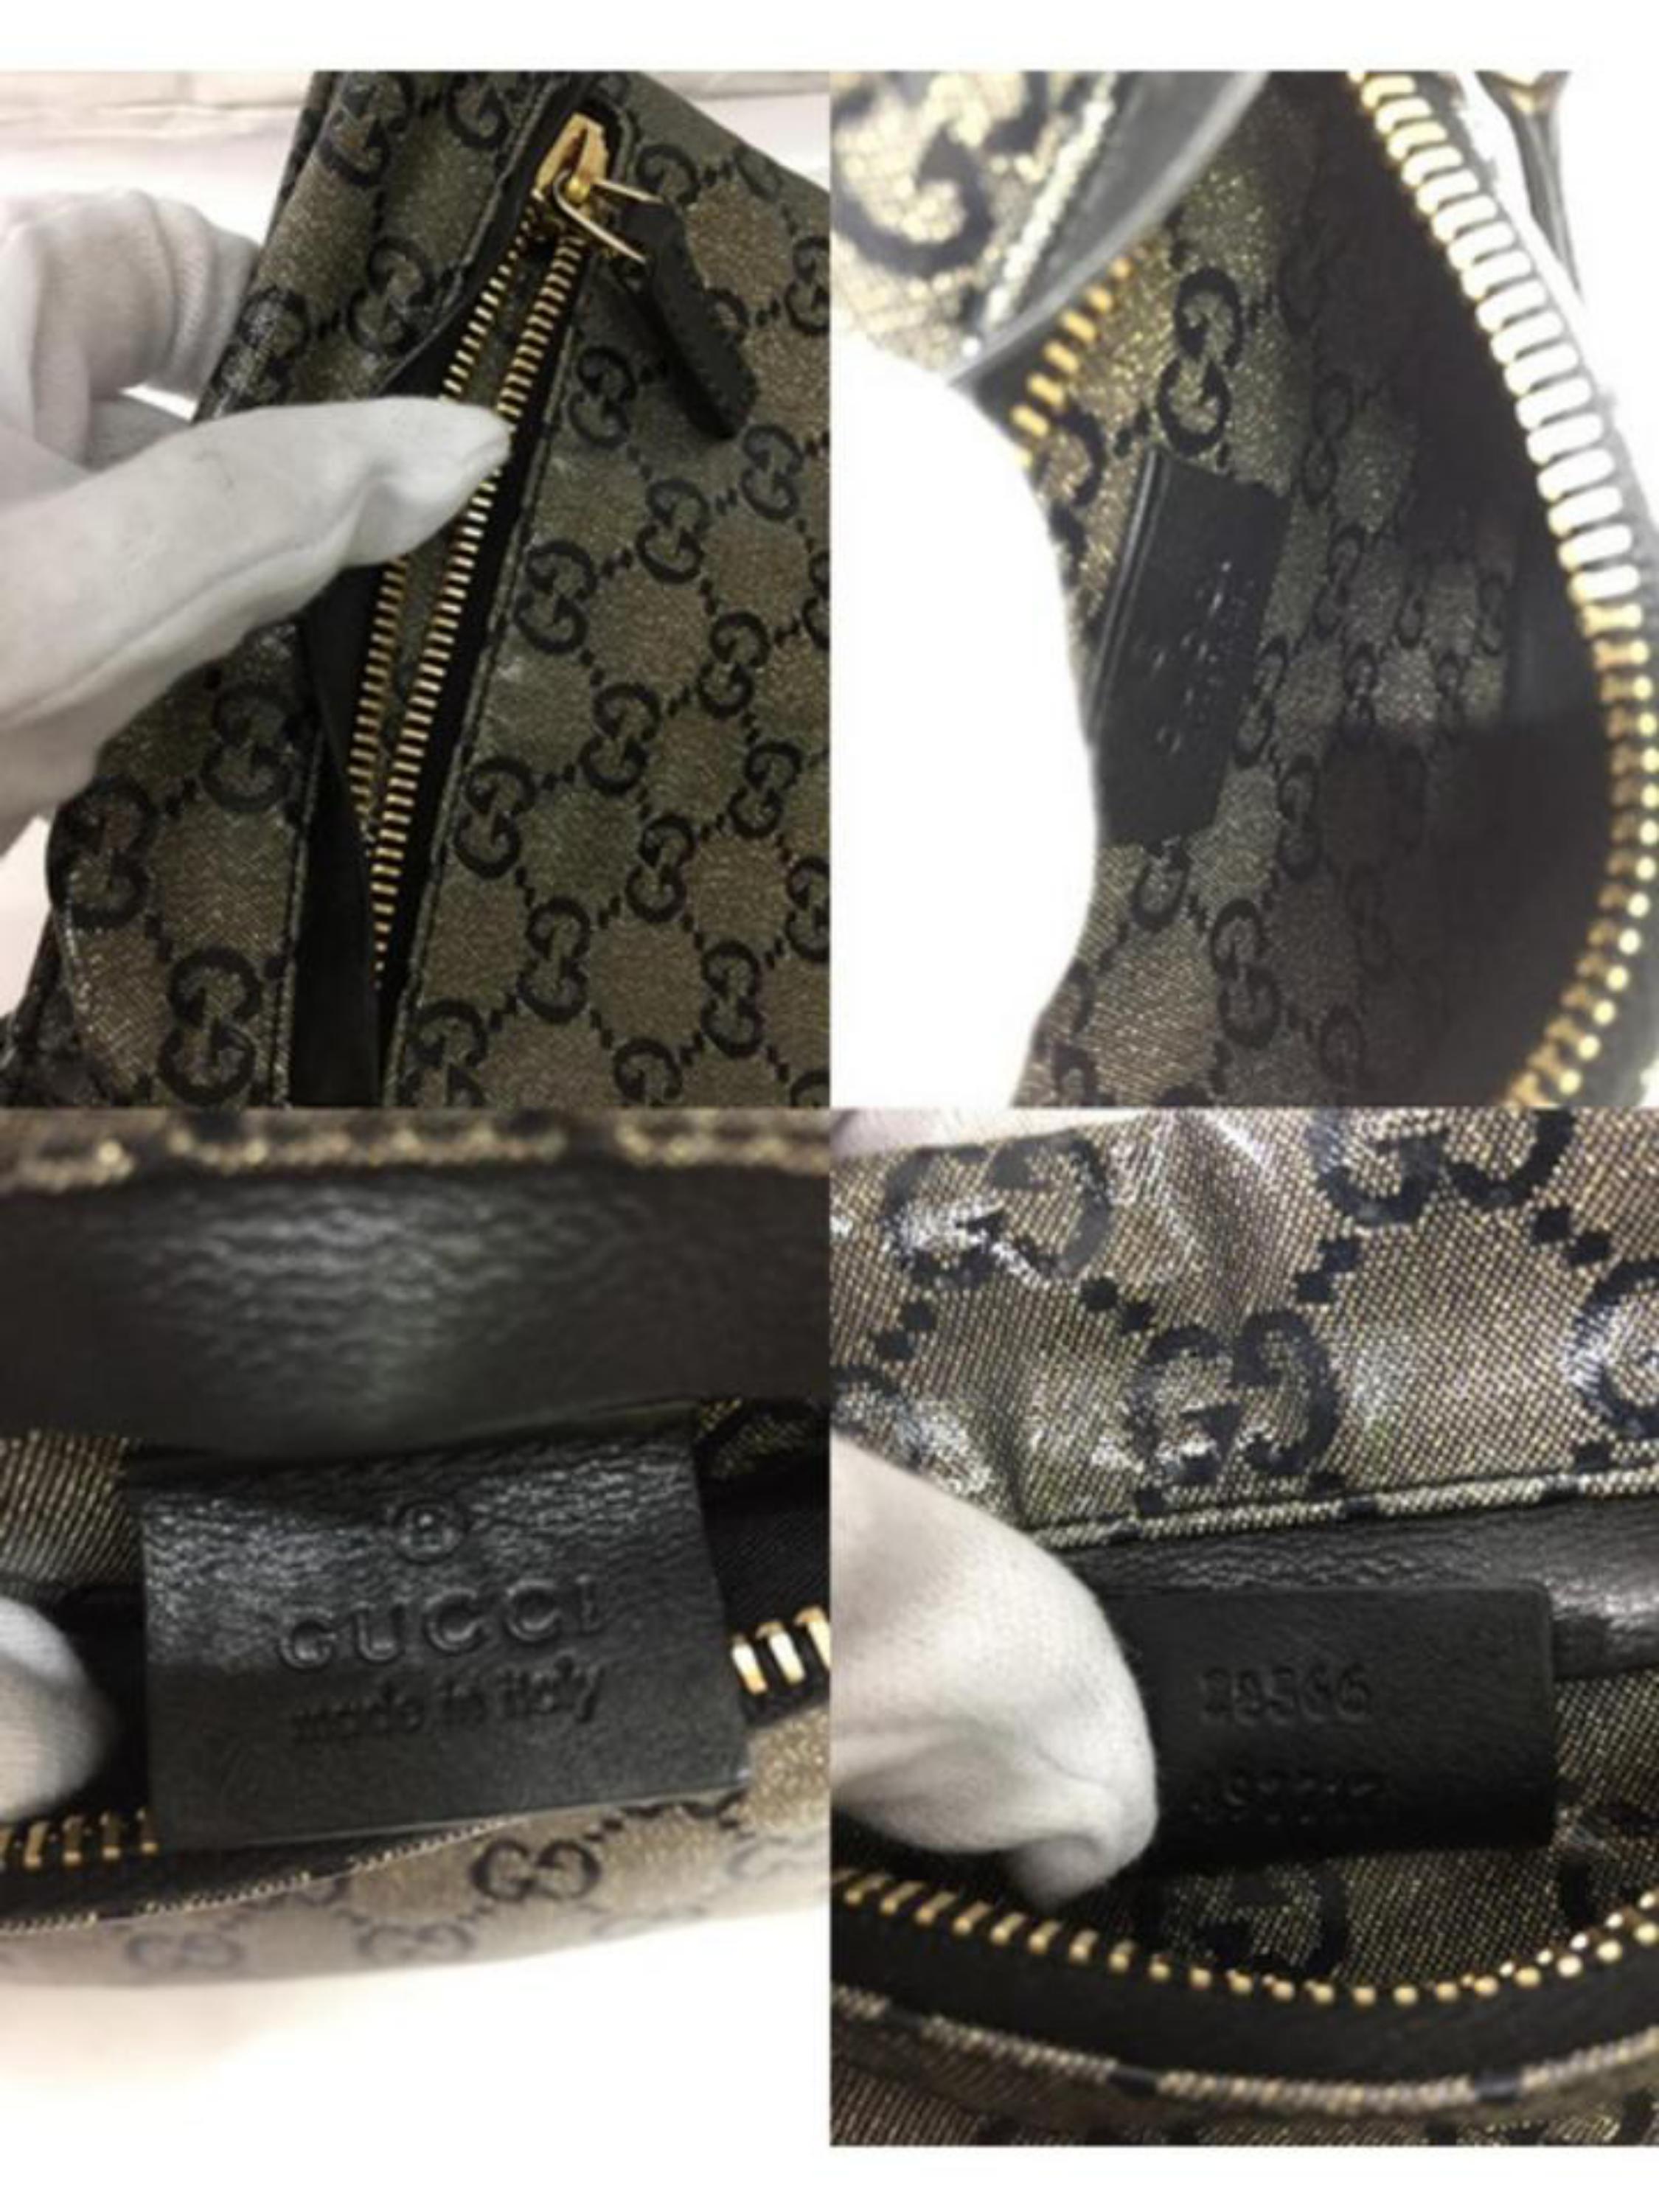 This item will ship out immediately.
Previously owned, unless otherwise stated.
Date Code/Serial Number: 28566 497717
Made In: Italy
Measurements: Length: 12